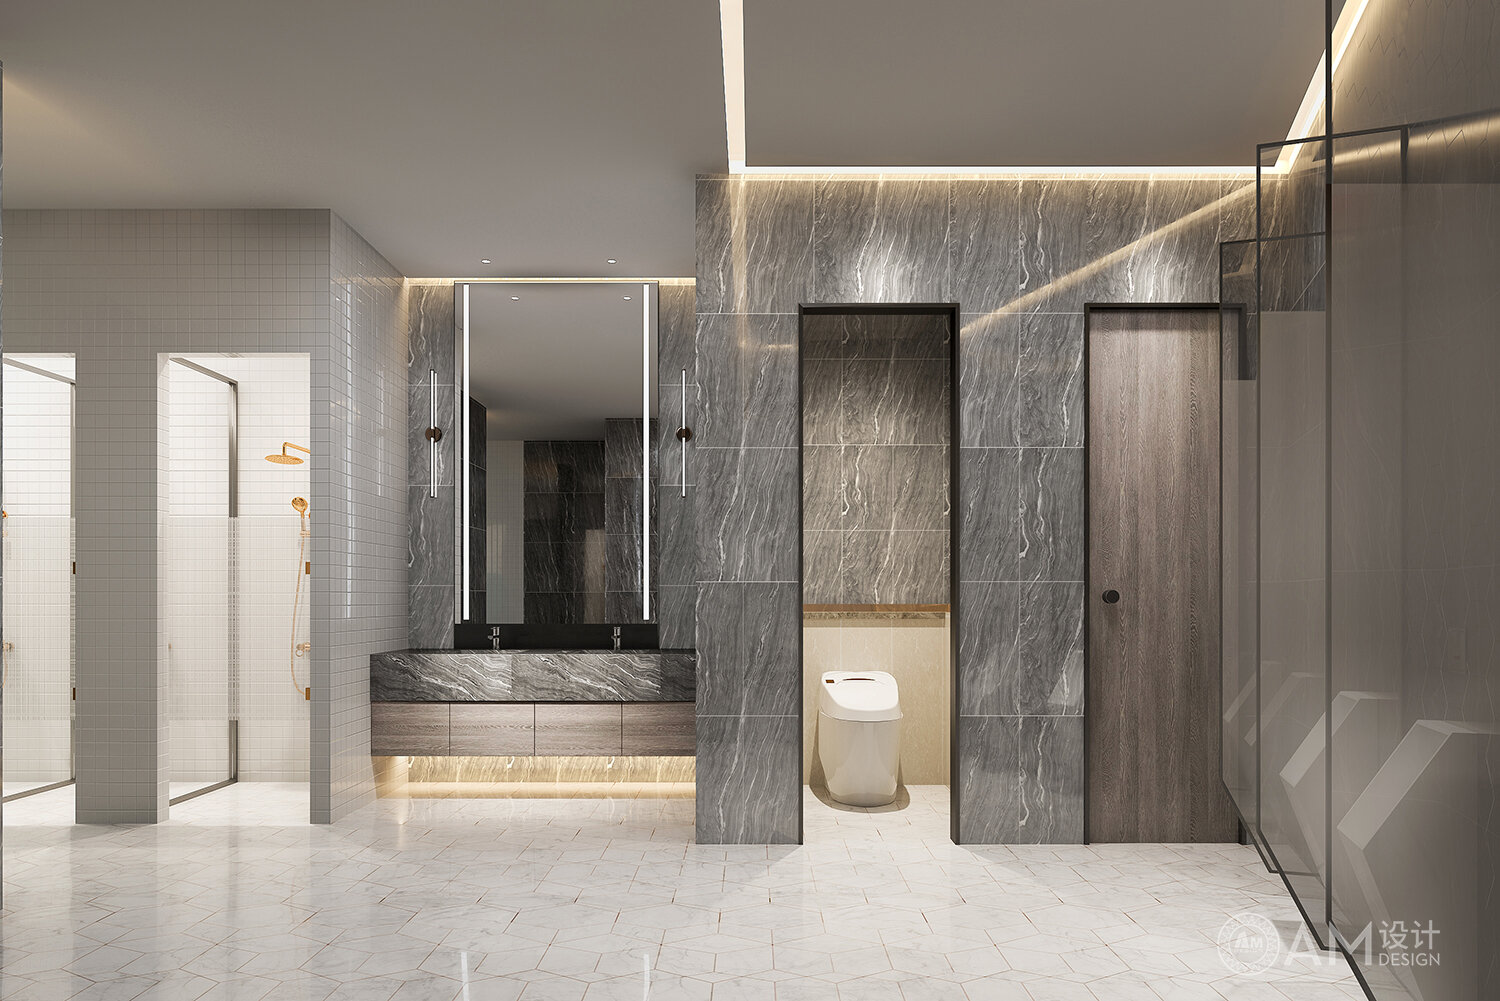 AM | Hefei Fitness Gym Men's Changing Shower Area Design